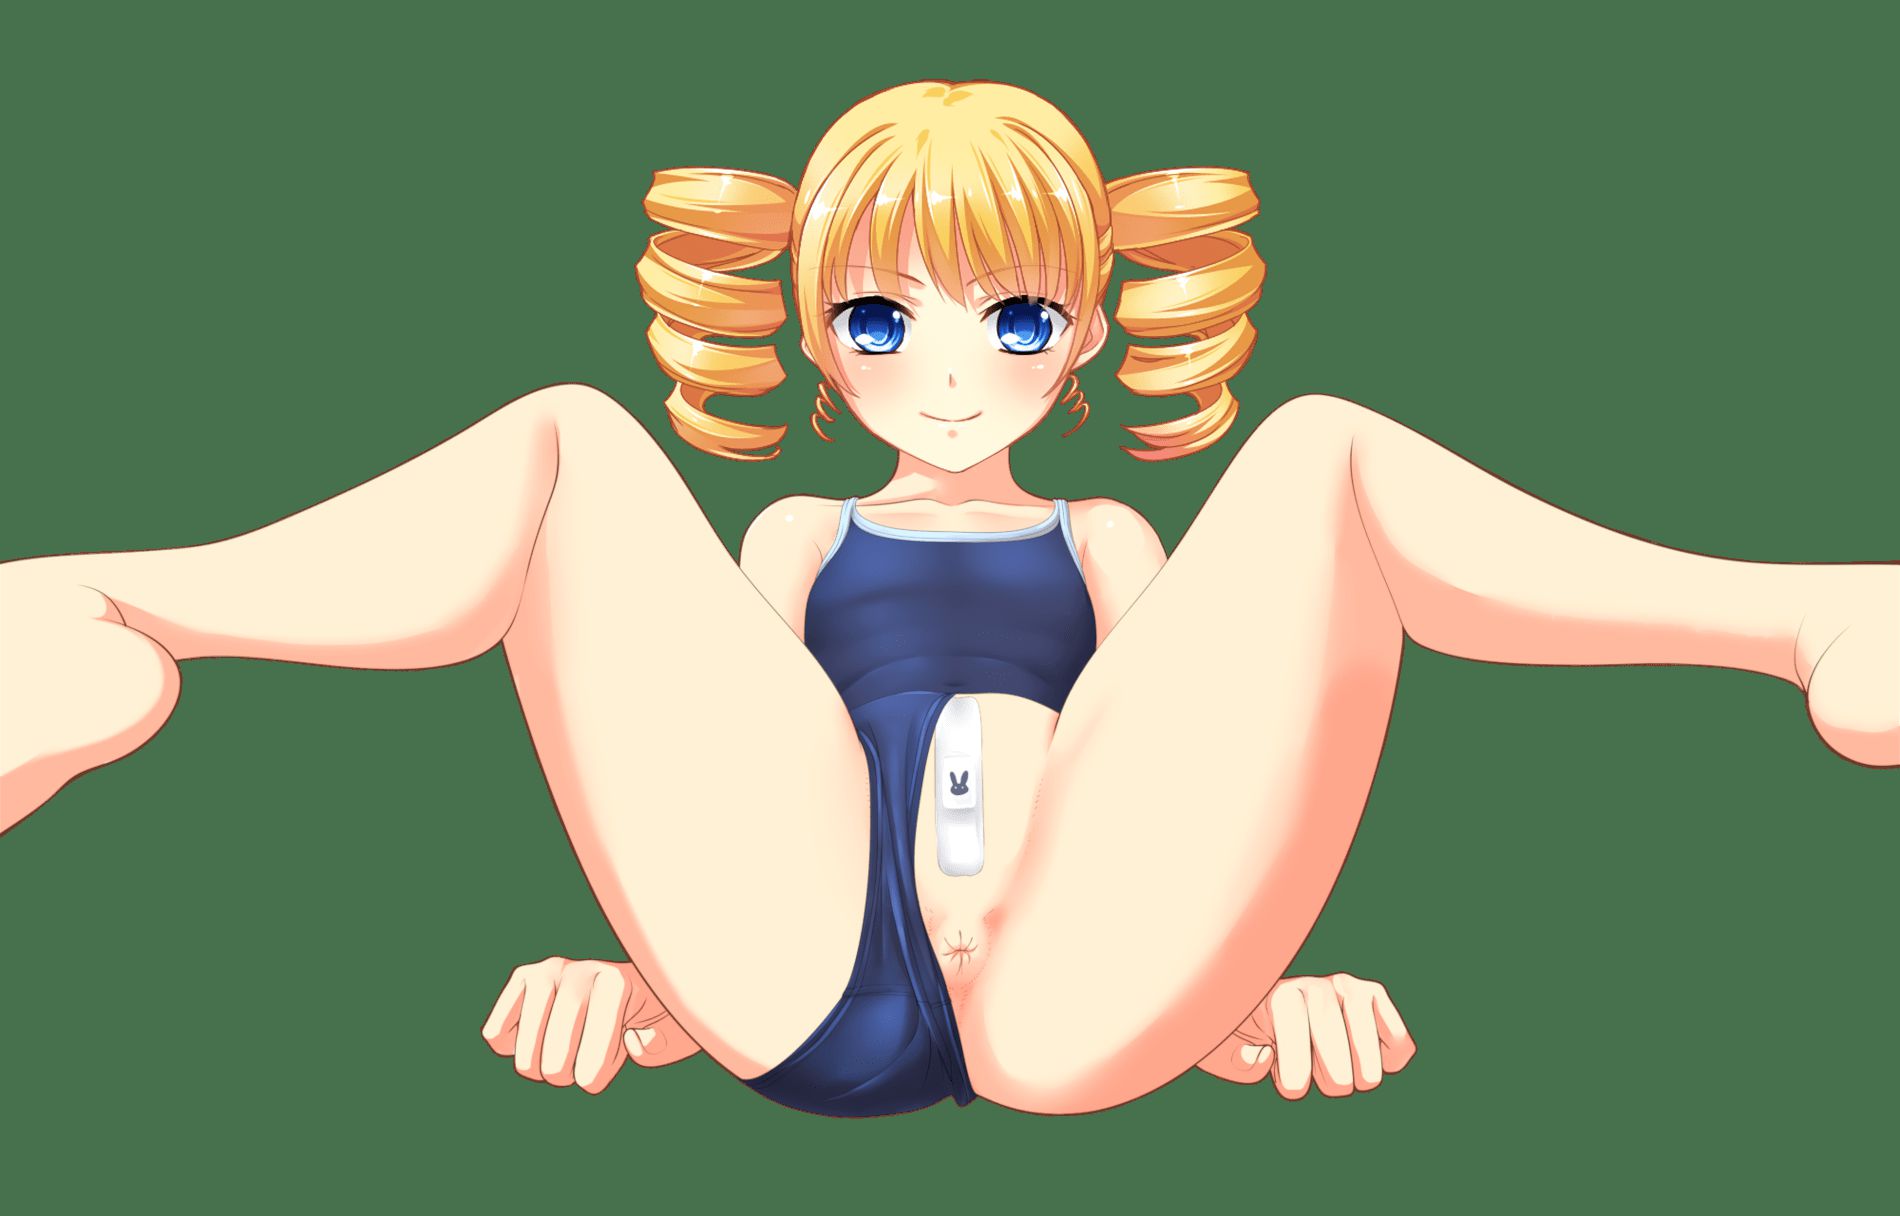 【Erocora Character Material】PNG background transparent erotic image such as anime characters Part 421 7